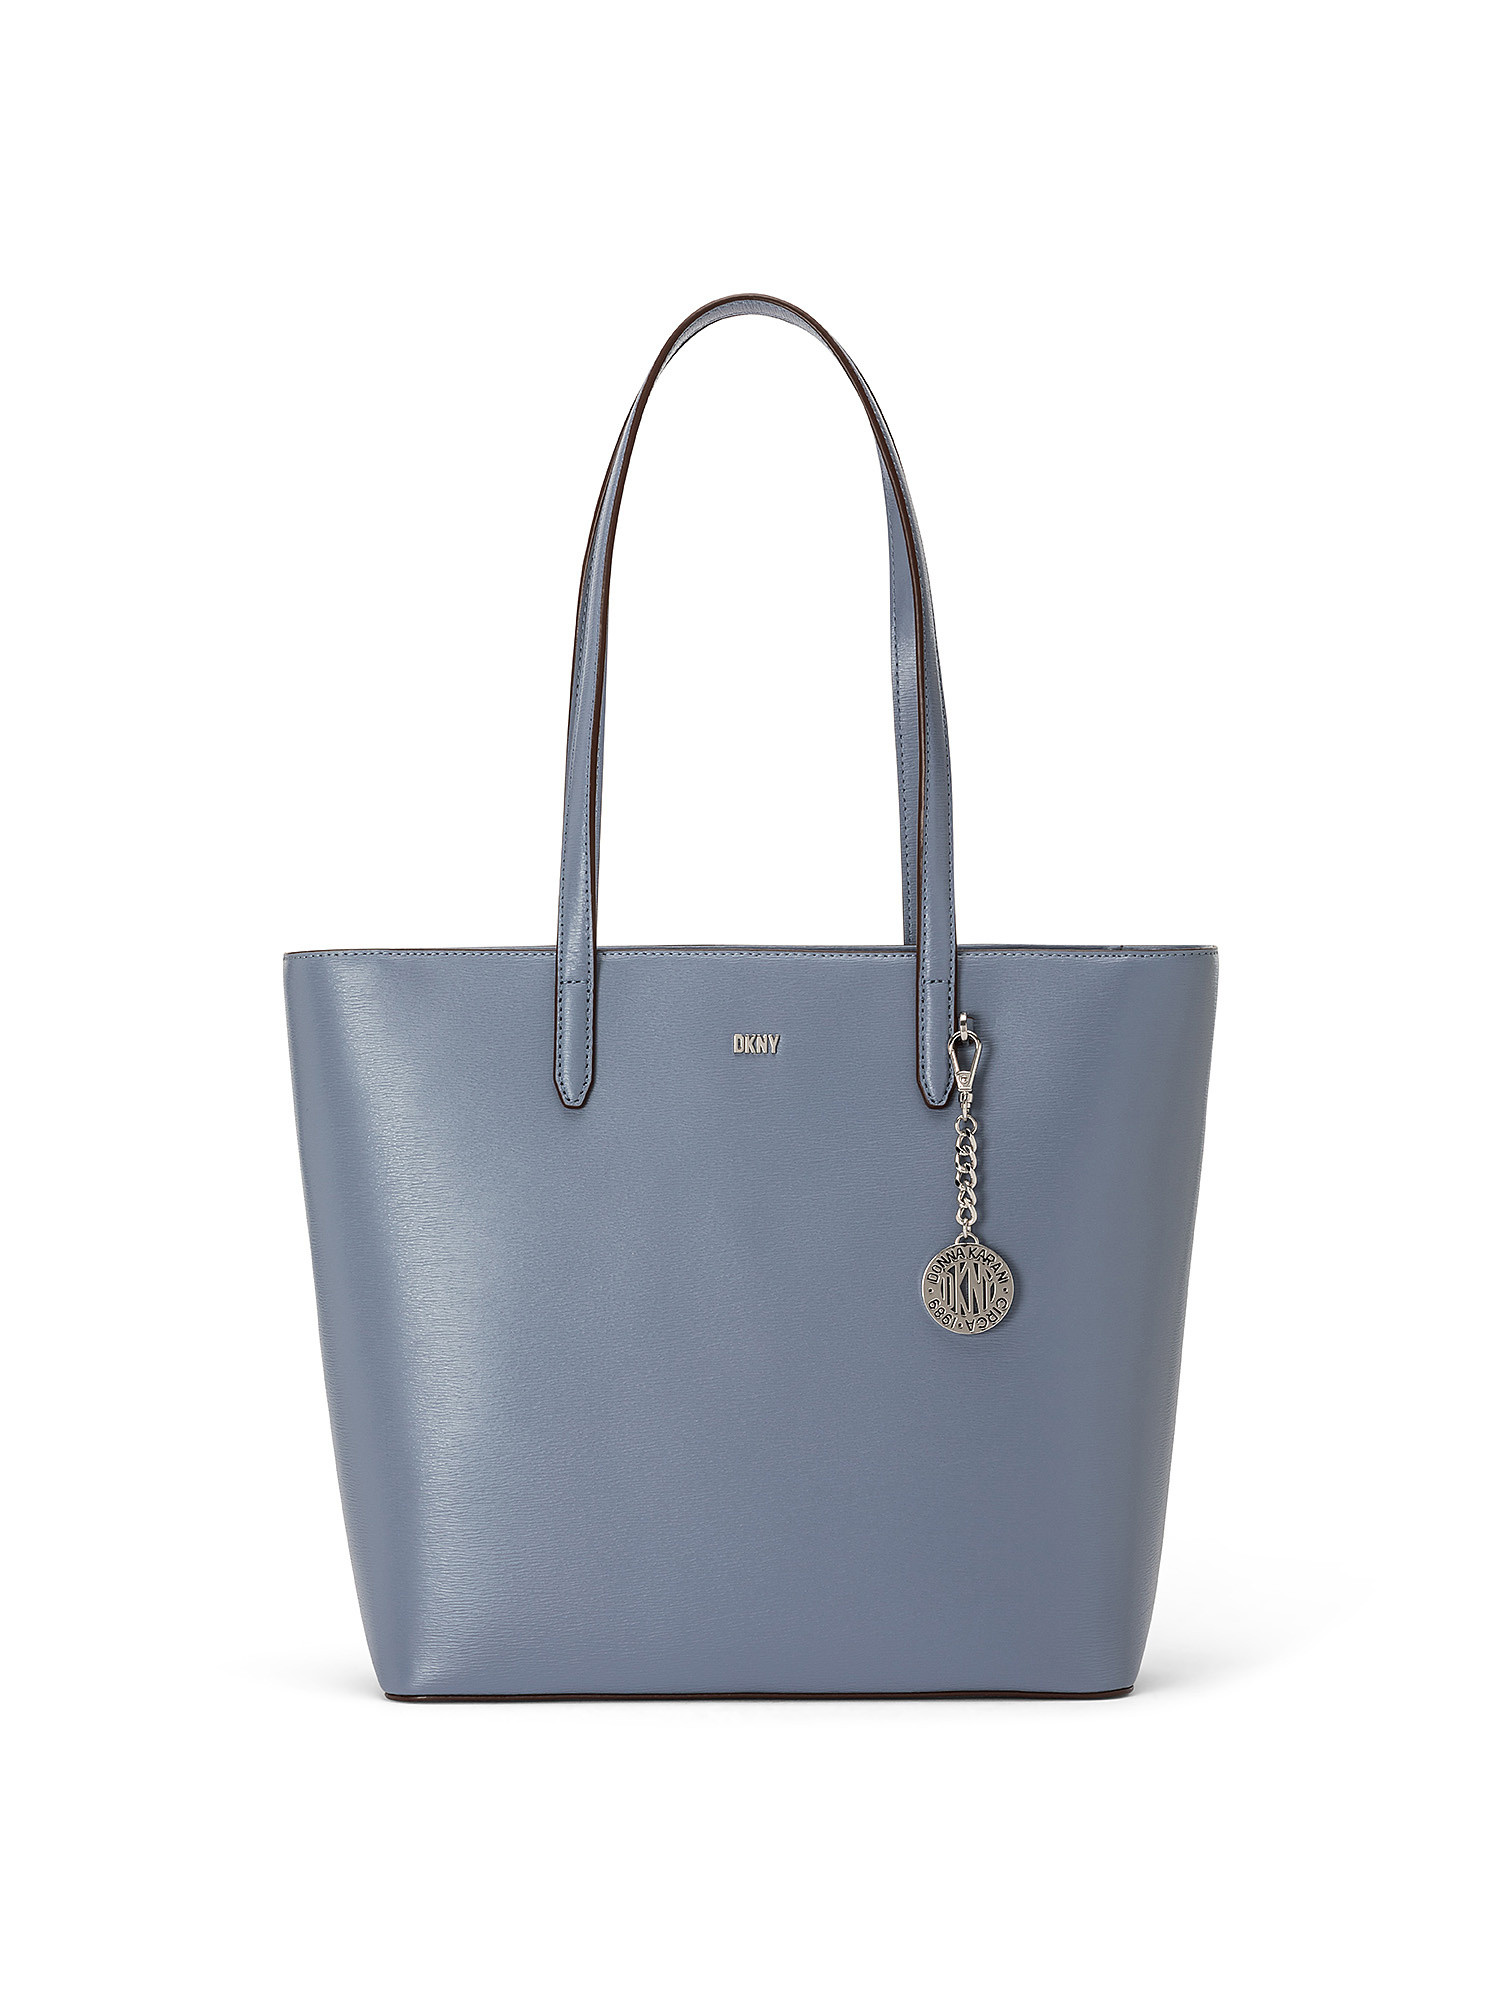 Bryant north south tote, Light Blue, large image number 0